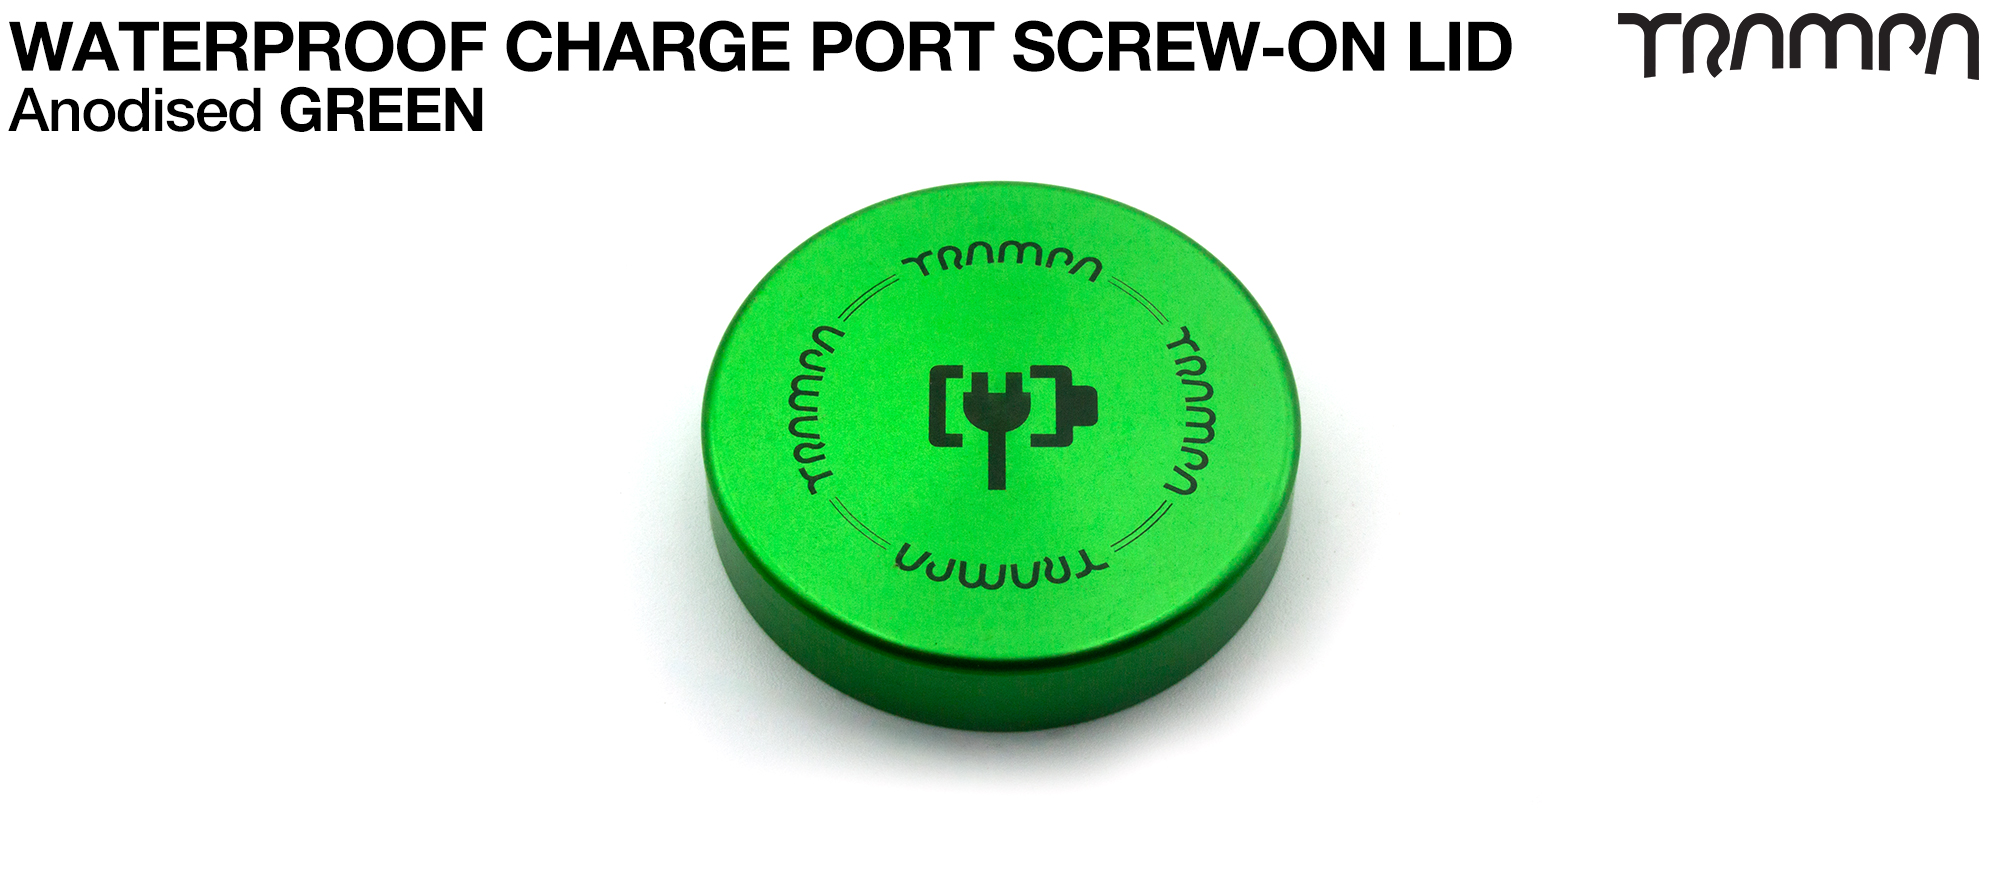 14FIFTIES Charge Point TOP - Anodised GREEN